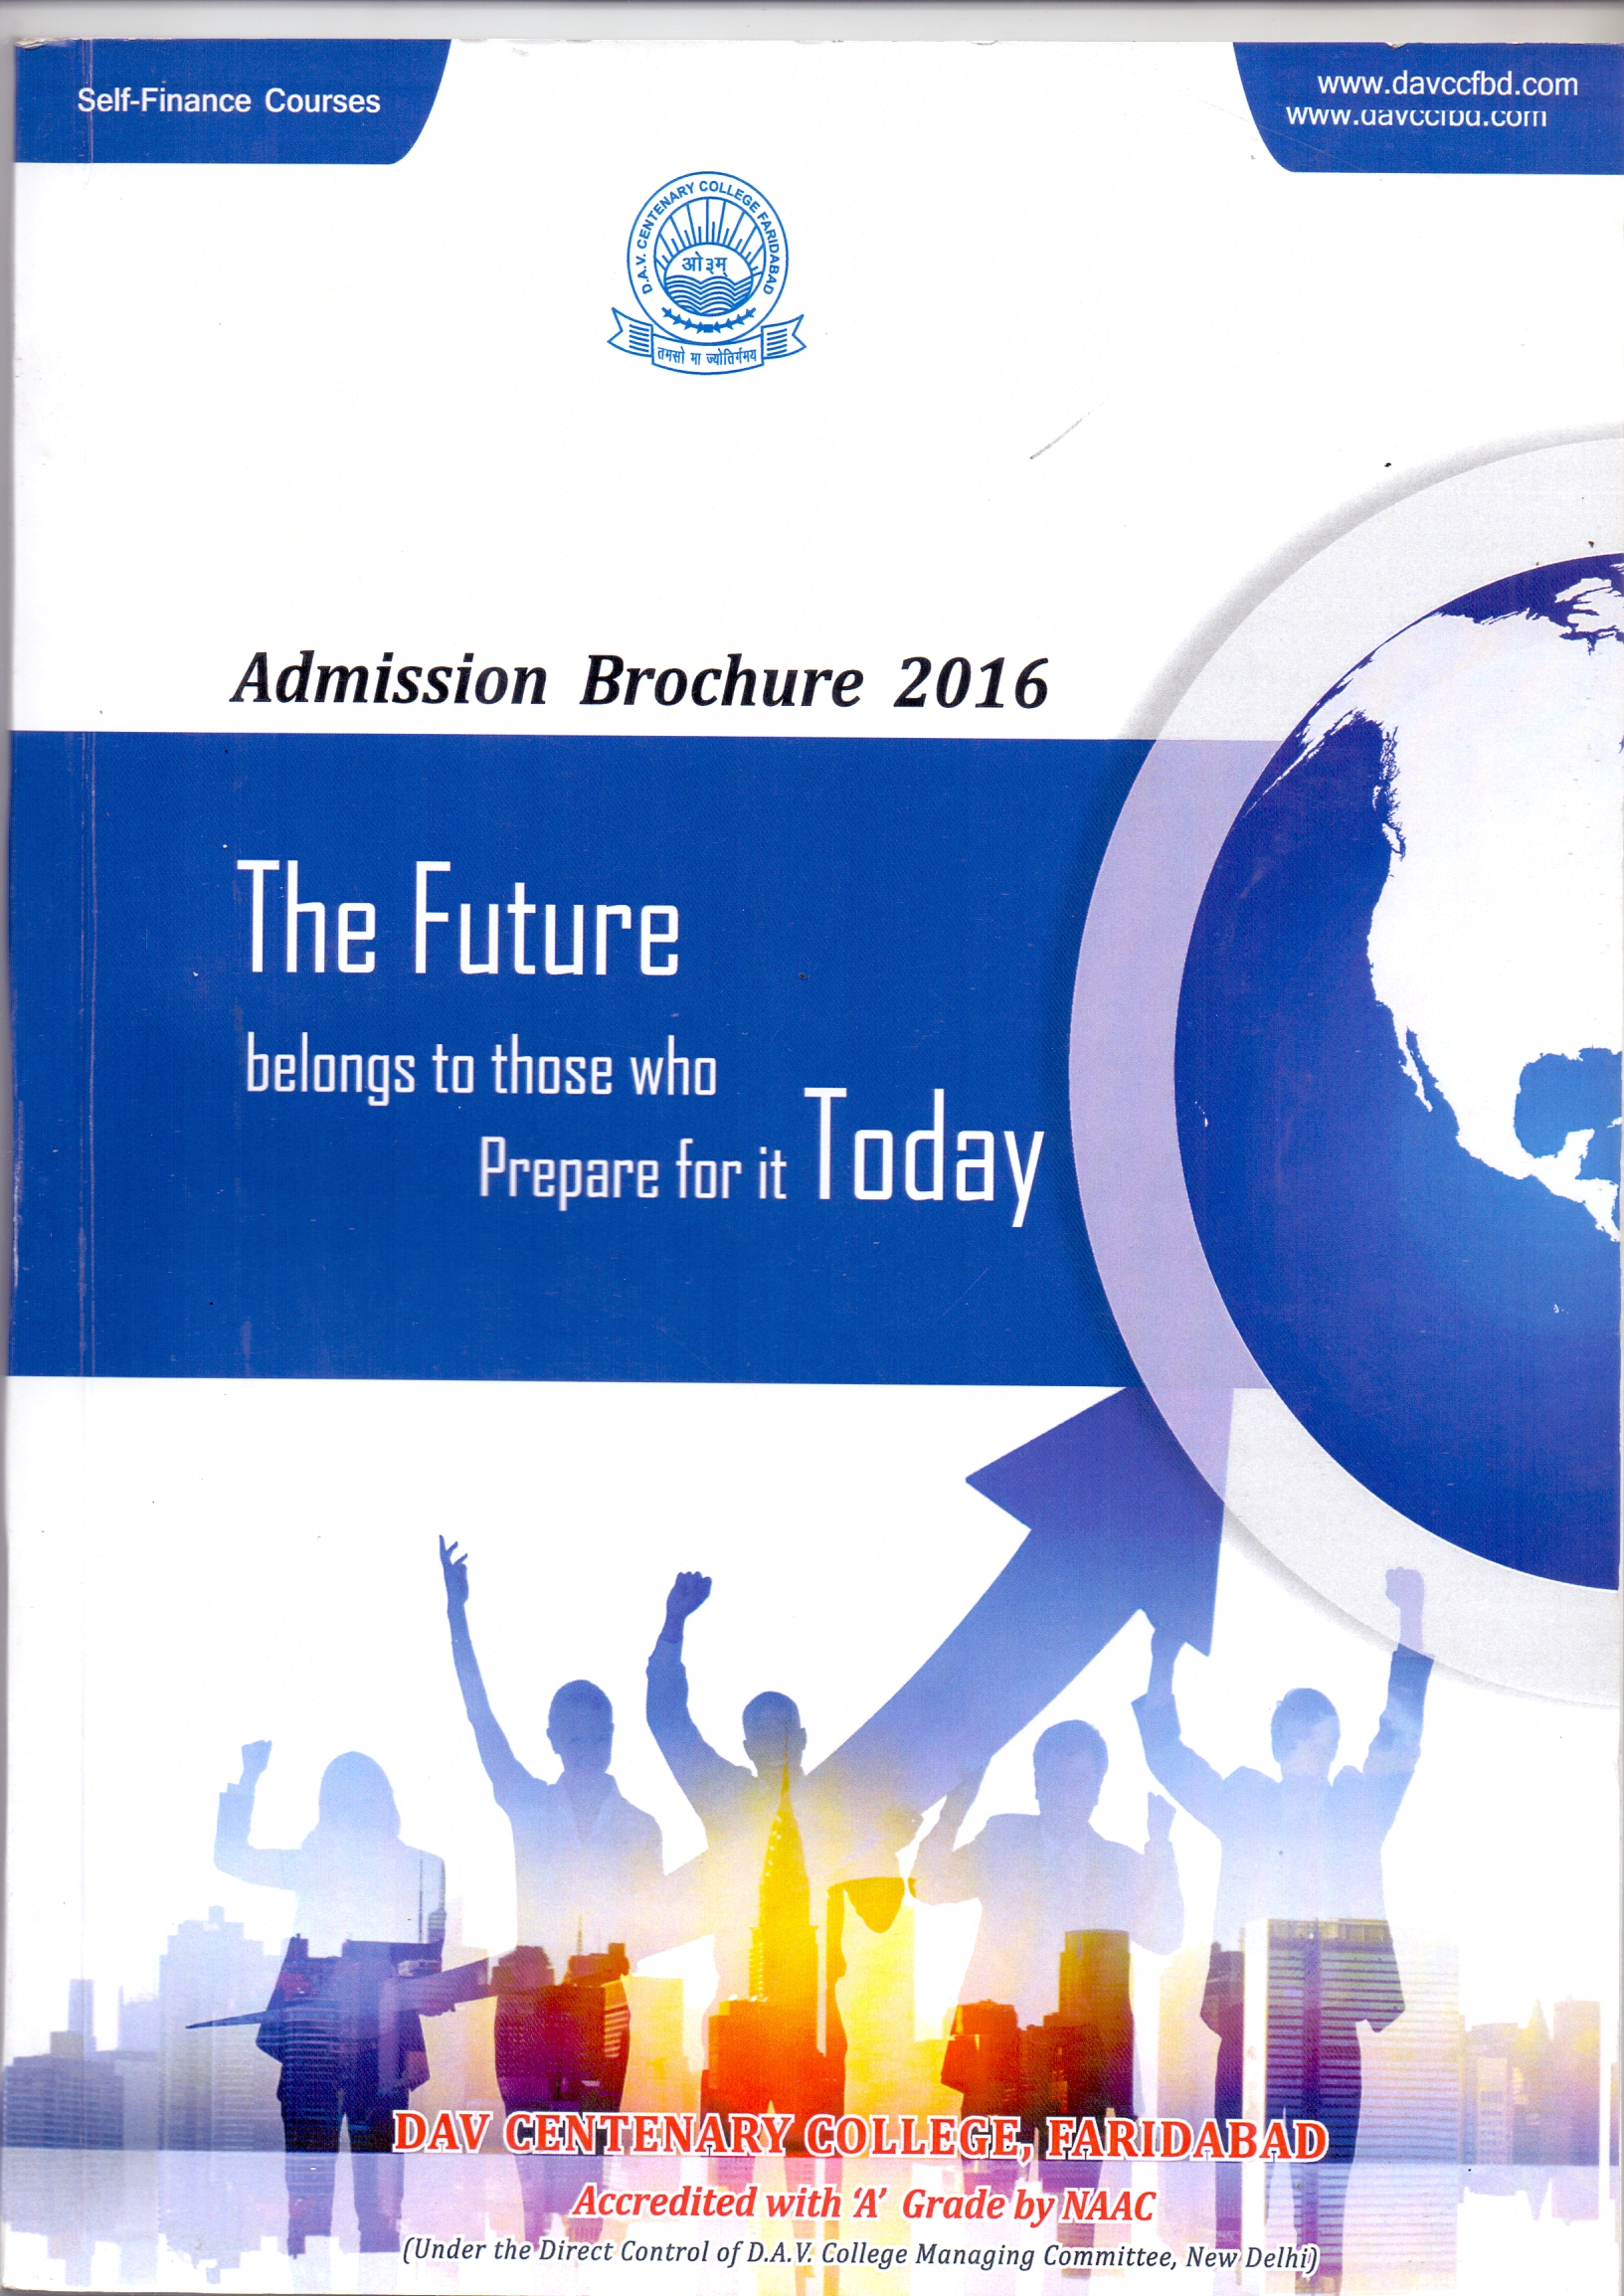 About Admission Brochure 